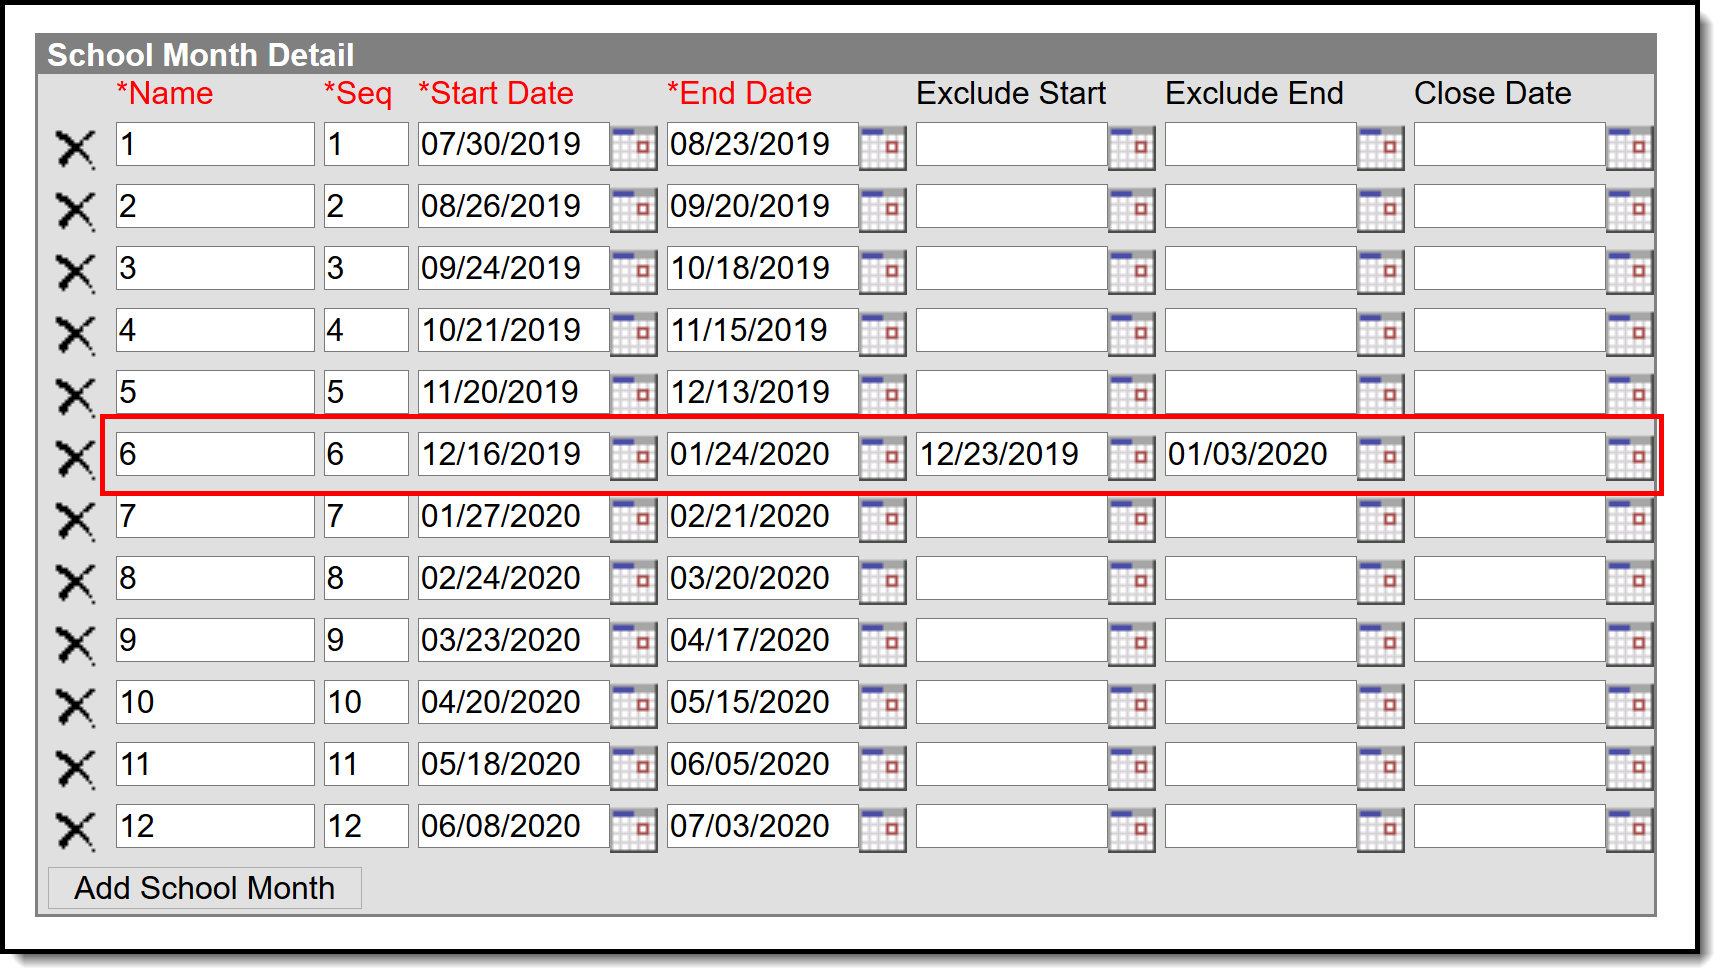 Screenshot of the School Month Detail editor with a callout around winter break, which has values in the Exclude Start and Exclude End date fields.